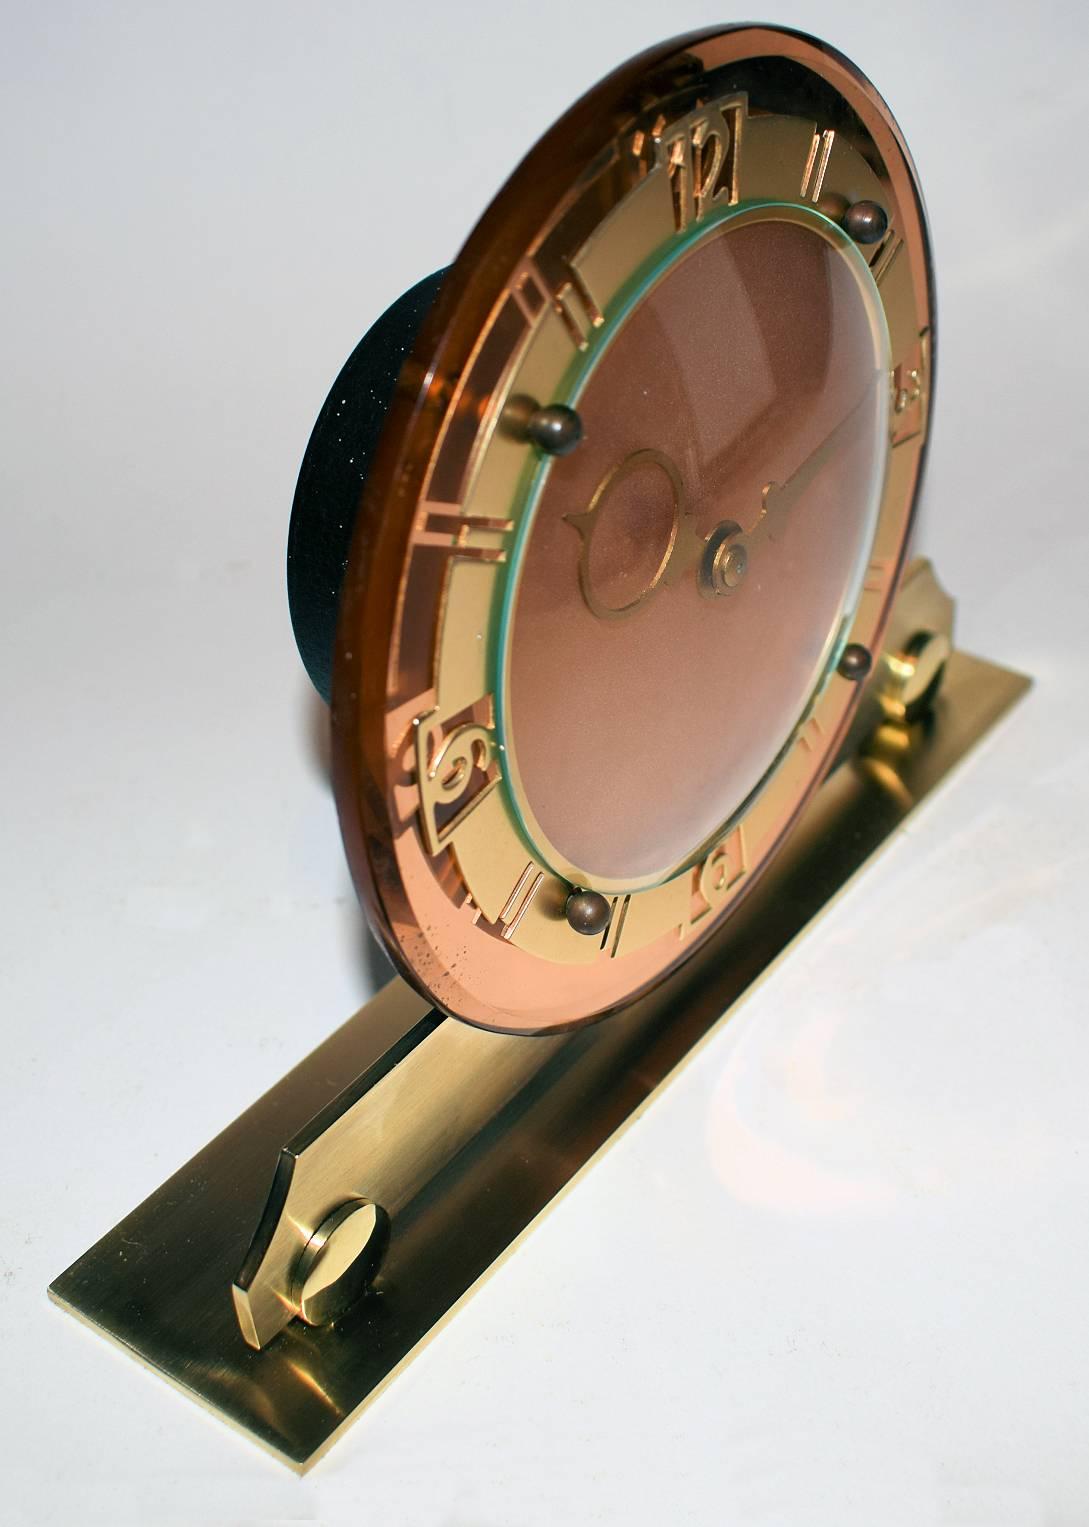 This is a very attractive English Art Deco clock, made circa 1930. It has a eight day wind up movement. The base is brass, the bezel is also brass with gold tone finish. The backing glass is peach-coloured mirror . In excellent condition. Full